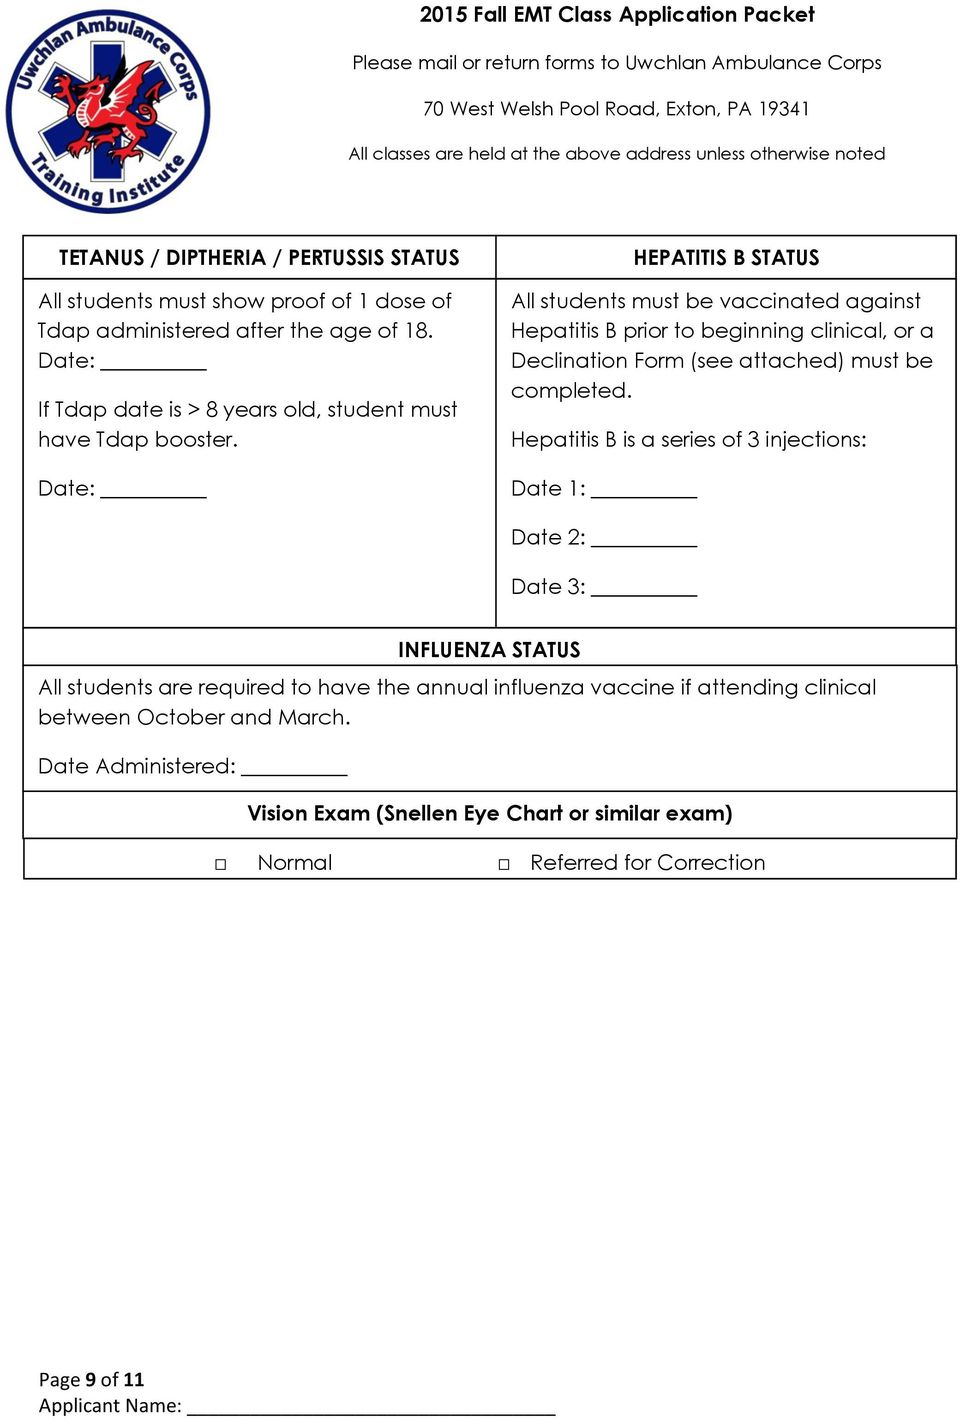 Date: HEPATITIS B STATUS All students must be vaccinated against Hepatitis B prior to beginning clinical, or a Declination Form (see attached) must be completed.